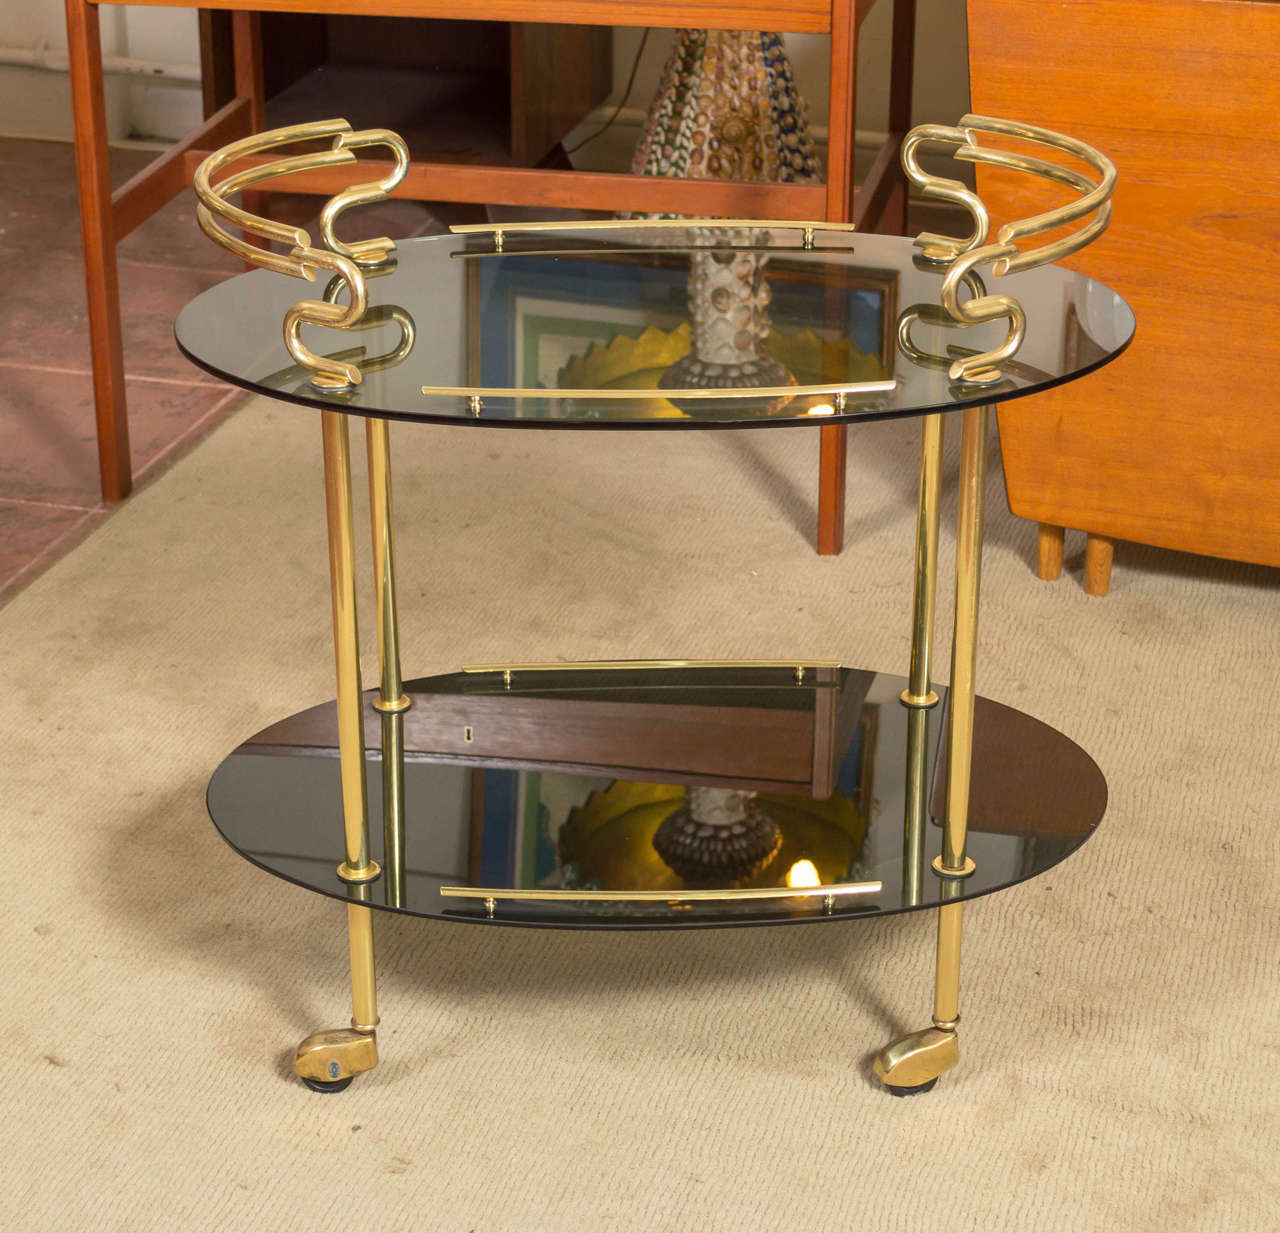 Just stunning, wonderful curves on this, circa 1960s, bar or serving cart, two oval shelves of smoke glass, with the metal work brass. Wheels are rubber so you have easy gliding across the room.